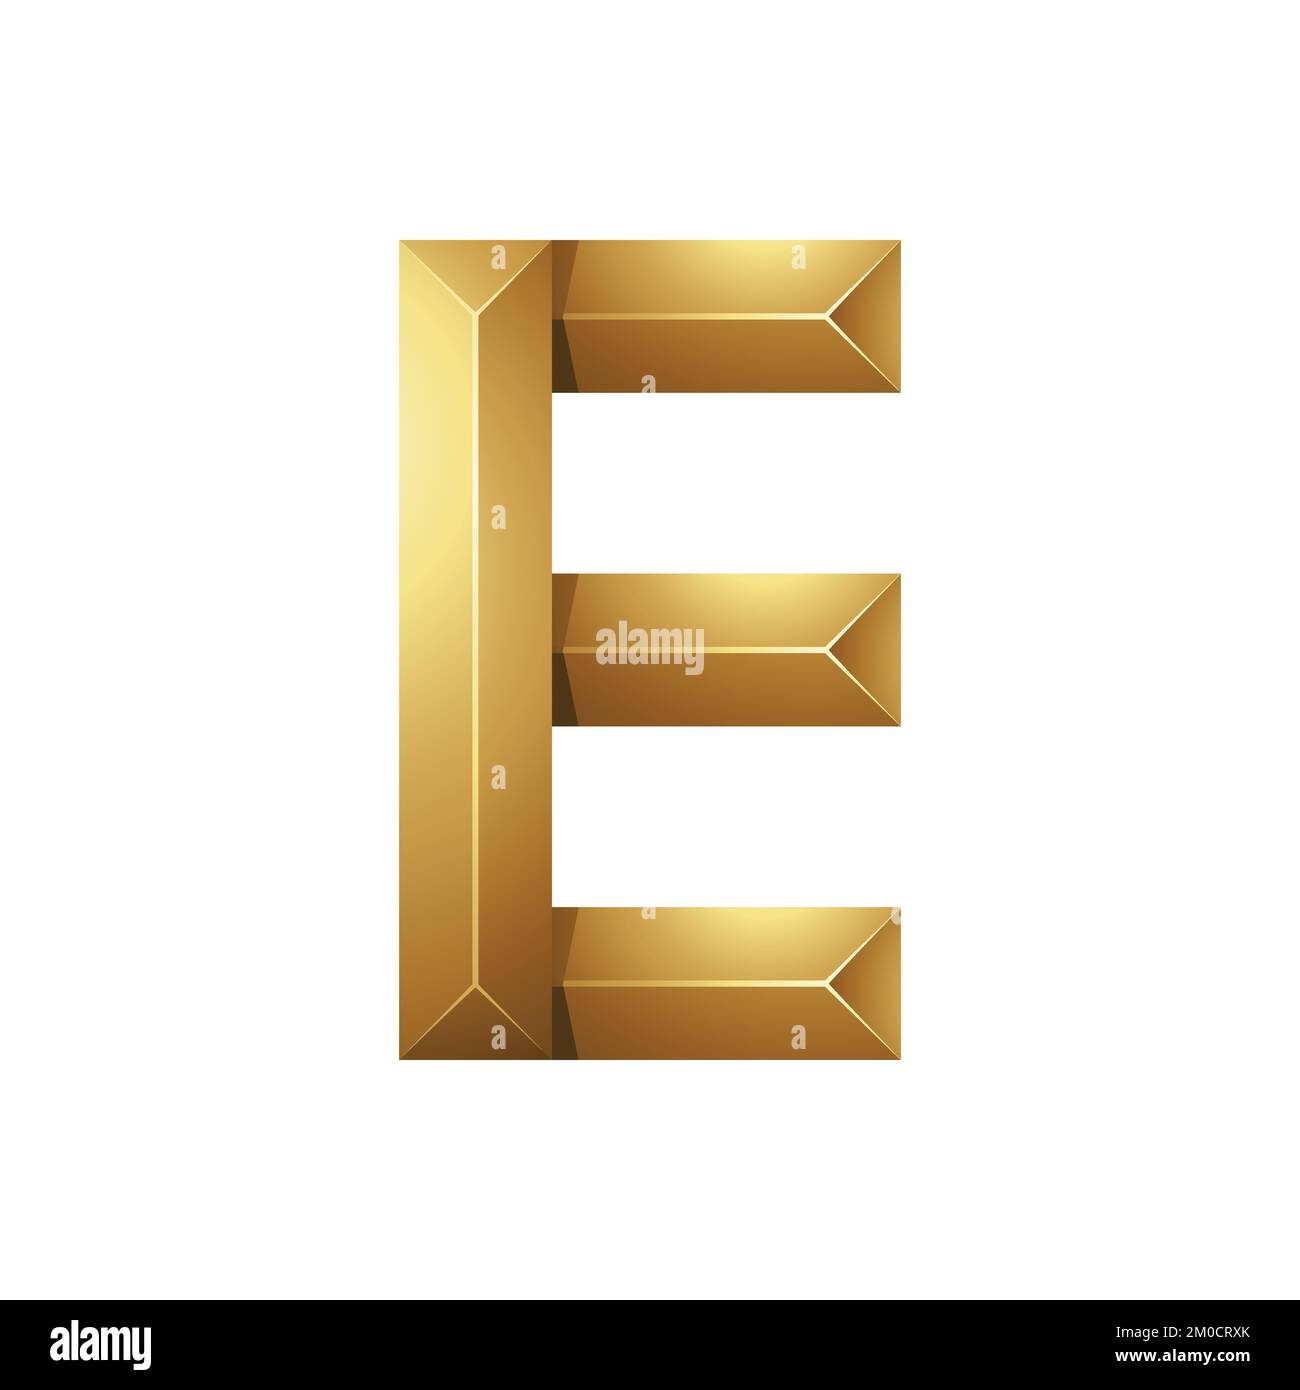 Golden Letter E Made of Pyramidical Rectangles on a White Background Stock Vector